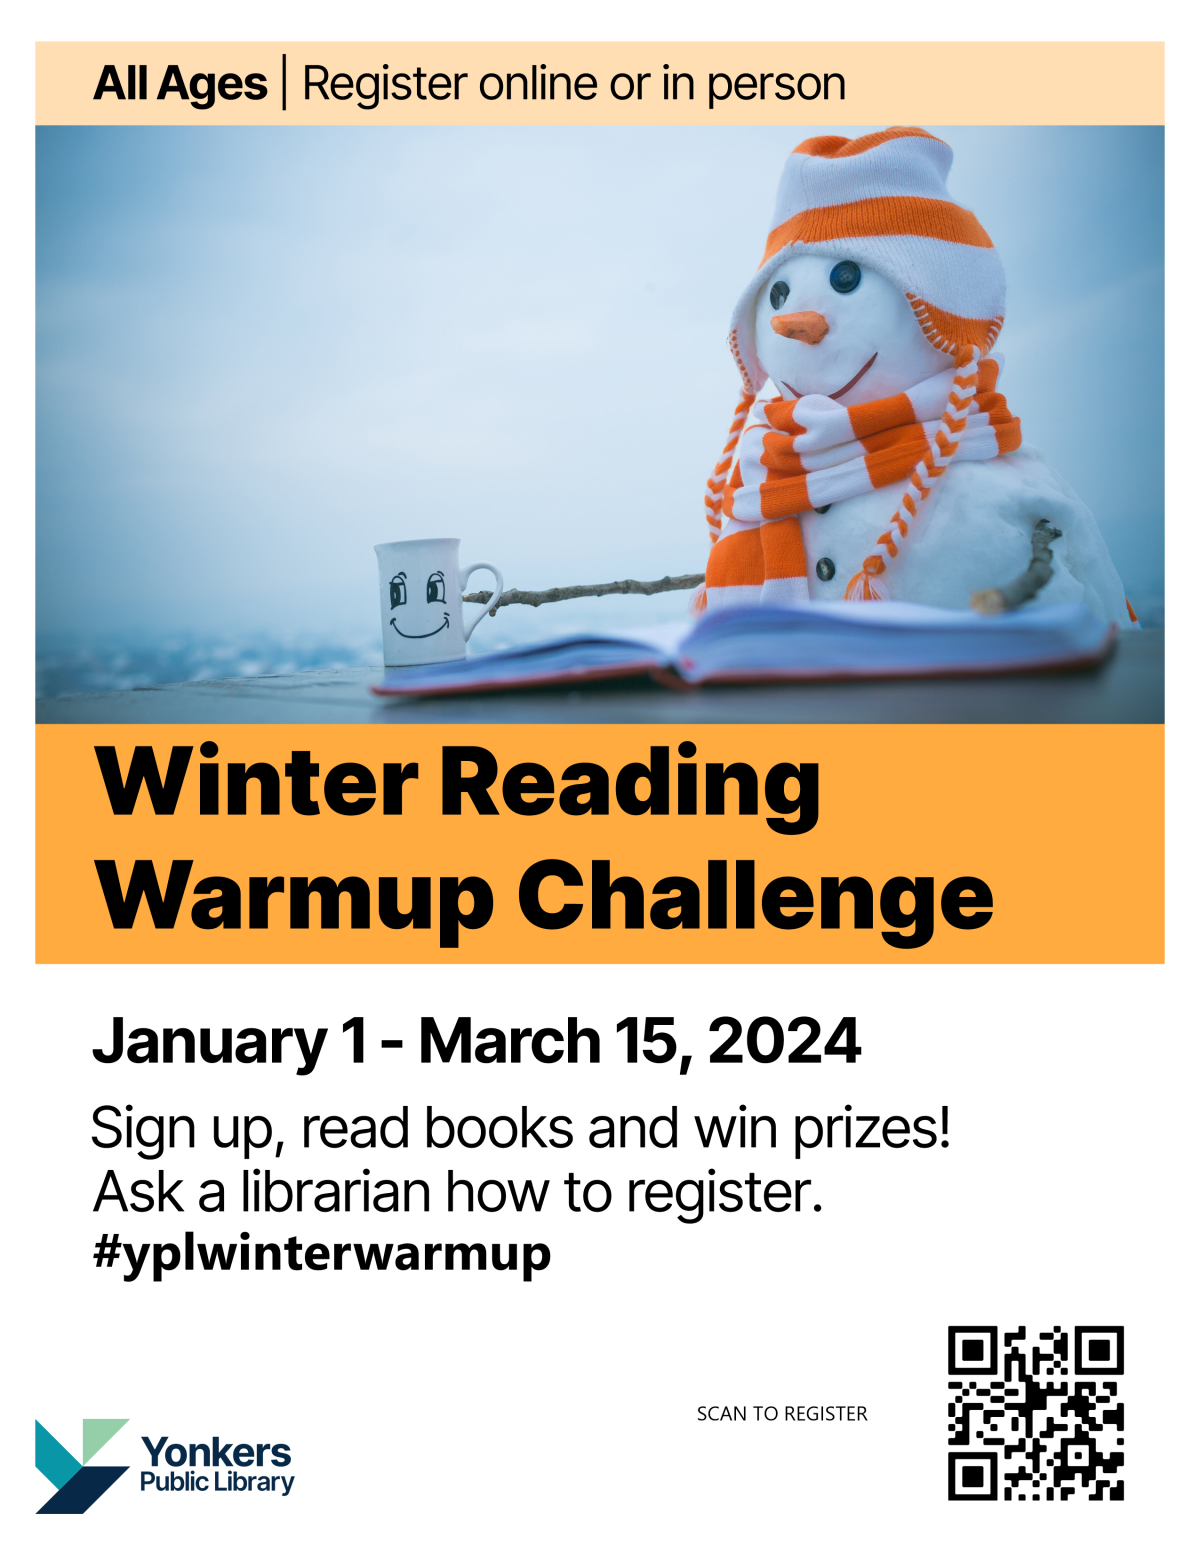 winter reading warm up challenge poster with a snowman on it